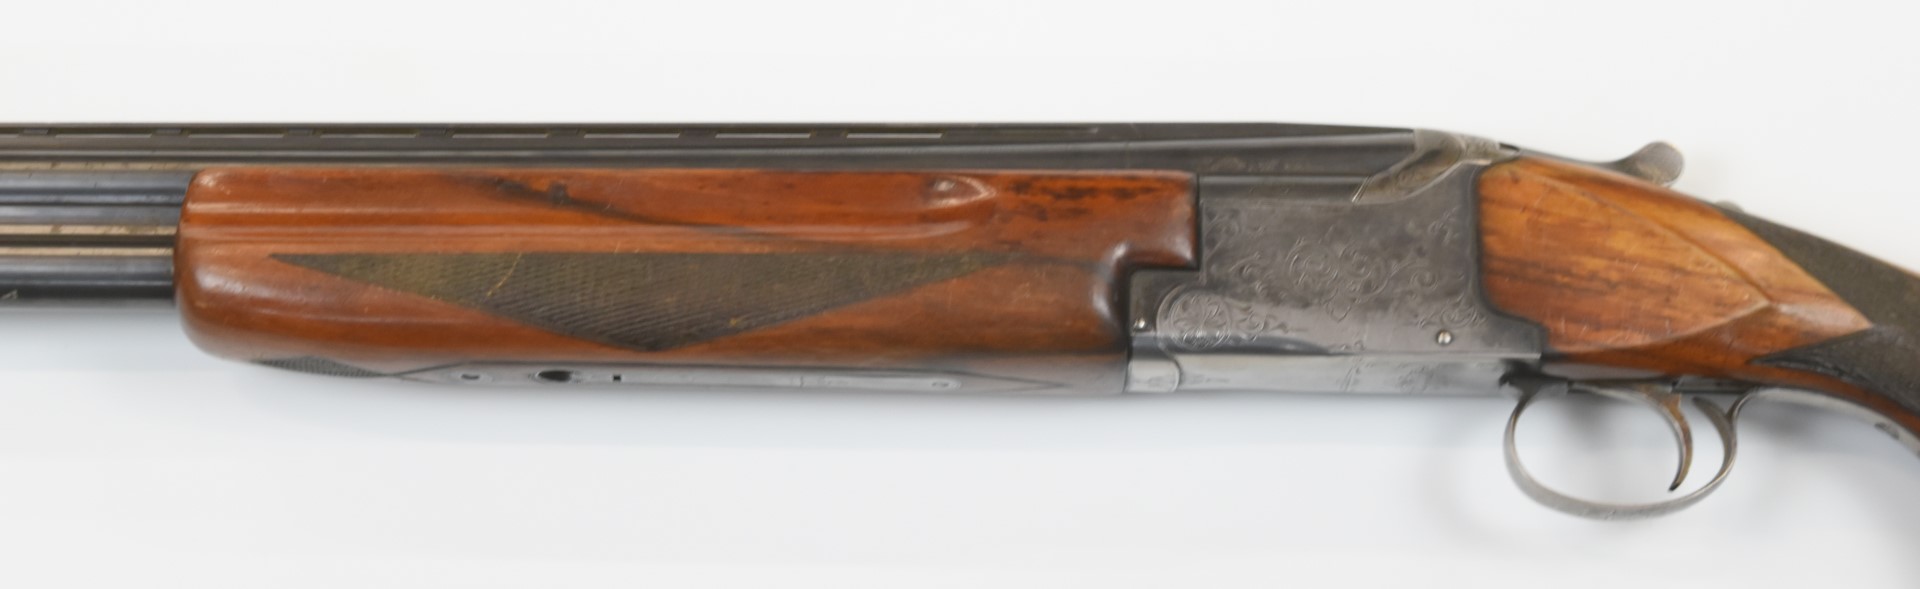 Winchester 101 12 bore over and under ejector shotgun with engraved lock, trigger guard, thumb - Image 9 of 10